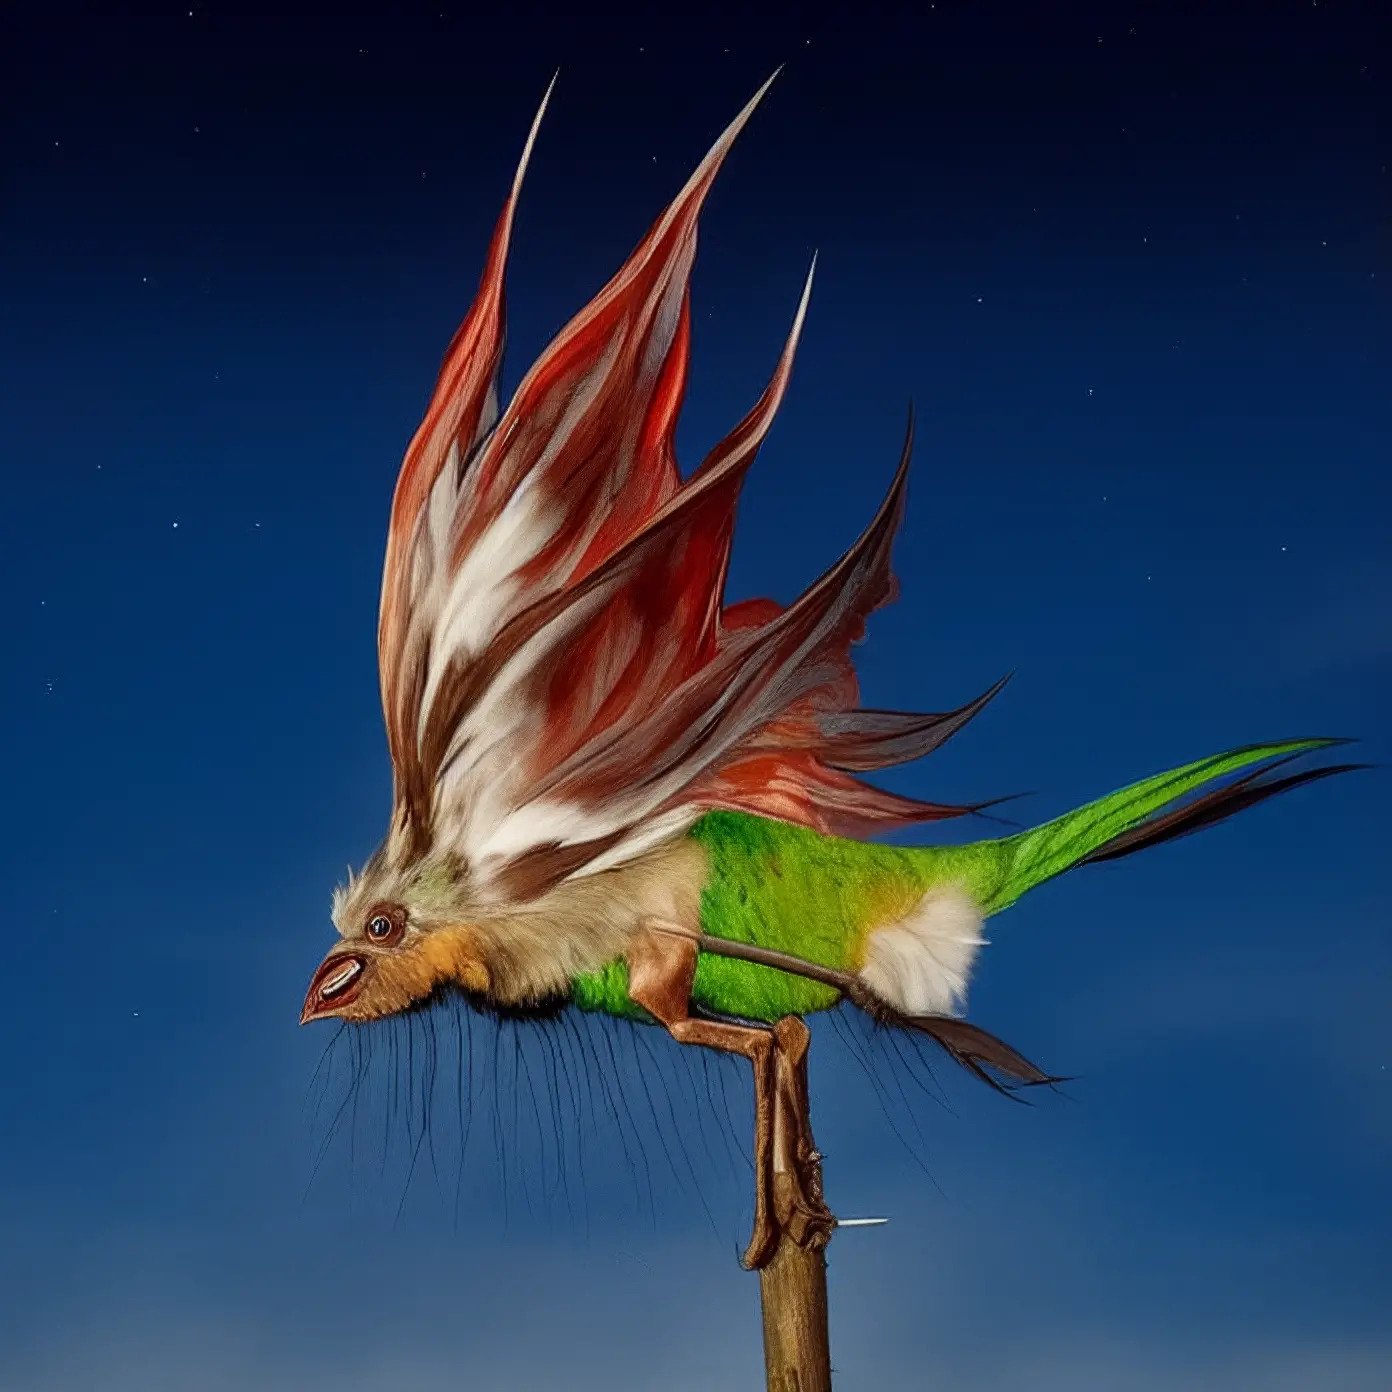 A digital image of a bird-like creature with a green fury body and strange, petal-like red wings, seen against a blue starry sky